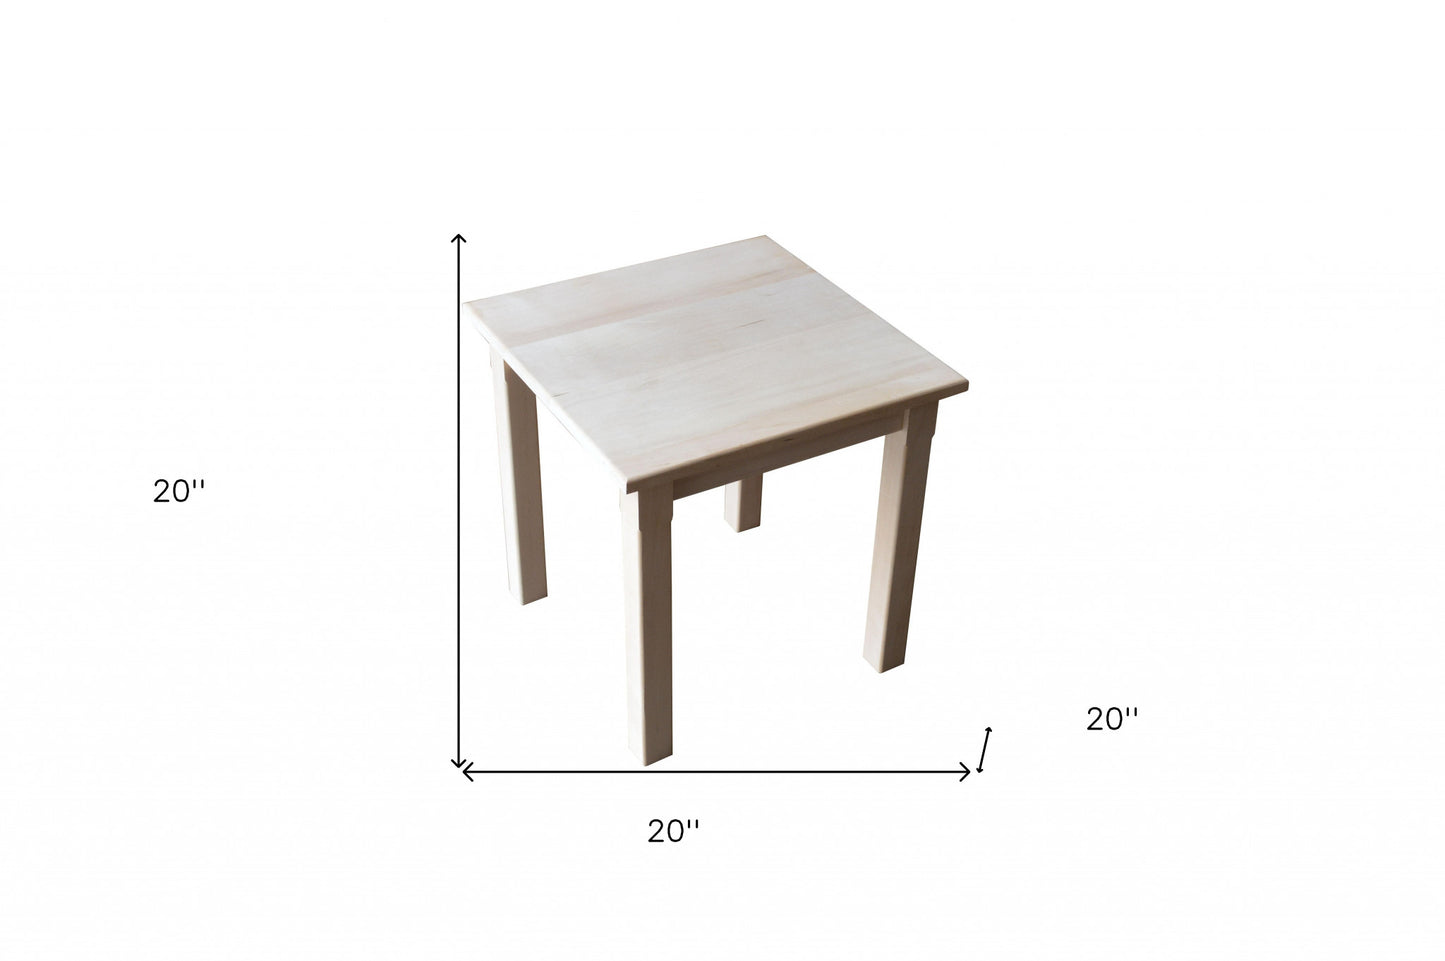 20" Unfinished Solid Wood Square End Table By Homeroots